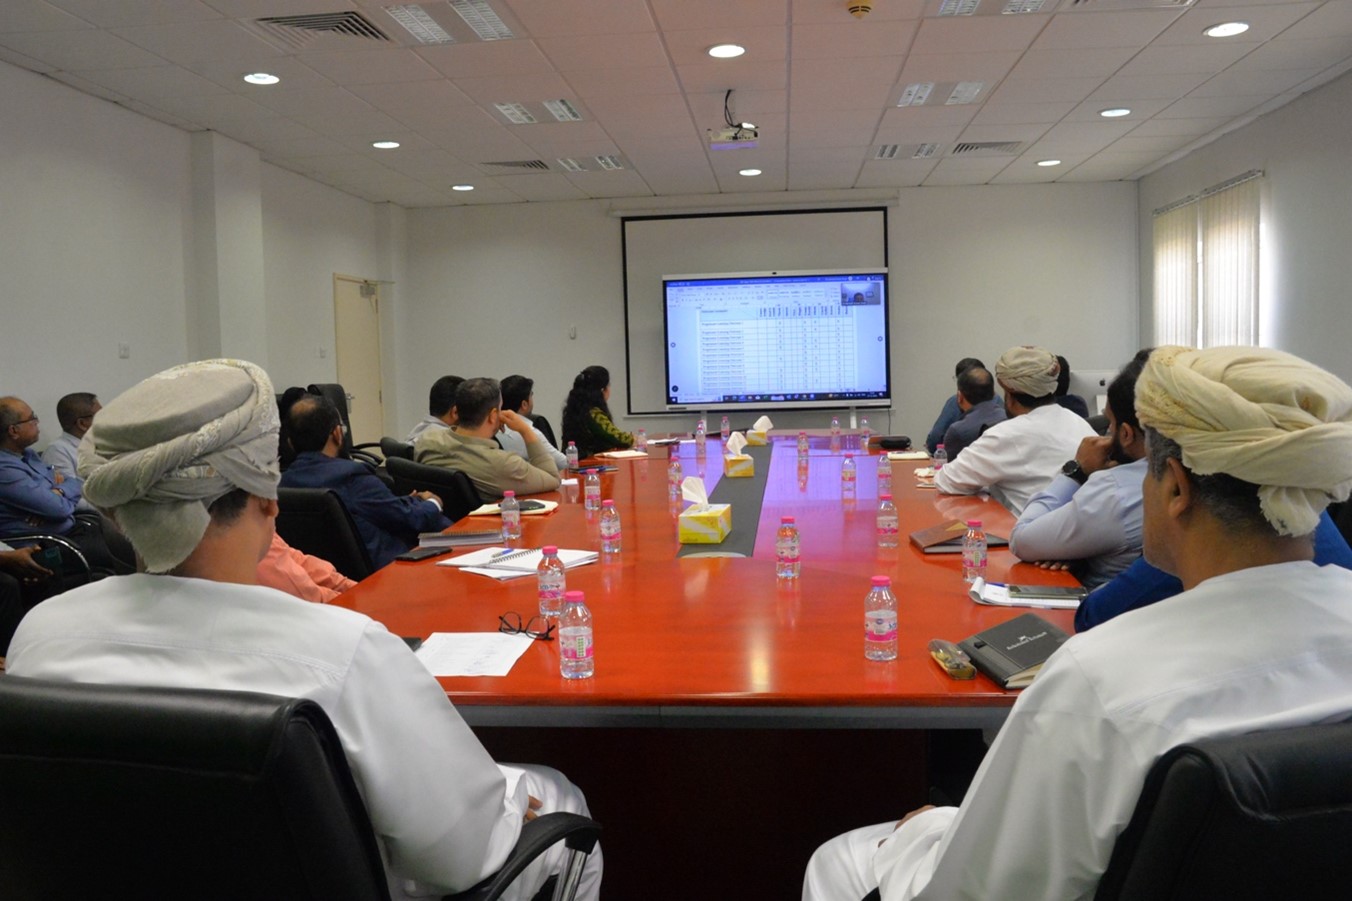 College of Engineering organized a seminar on Project-Based Learning for ABET accreditation